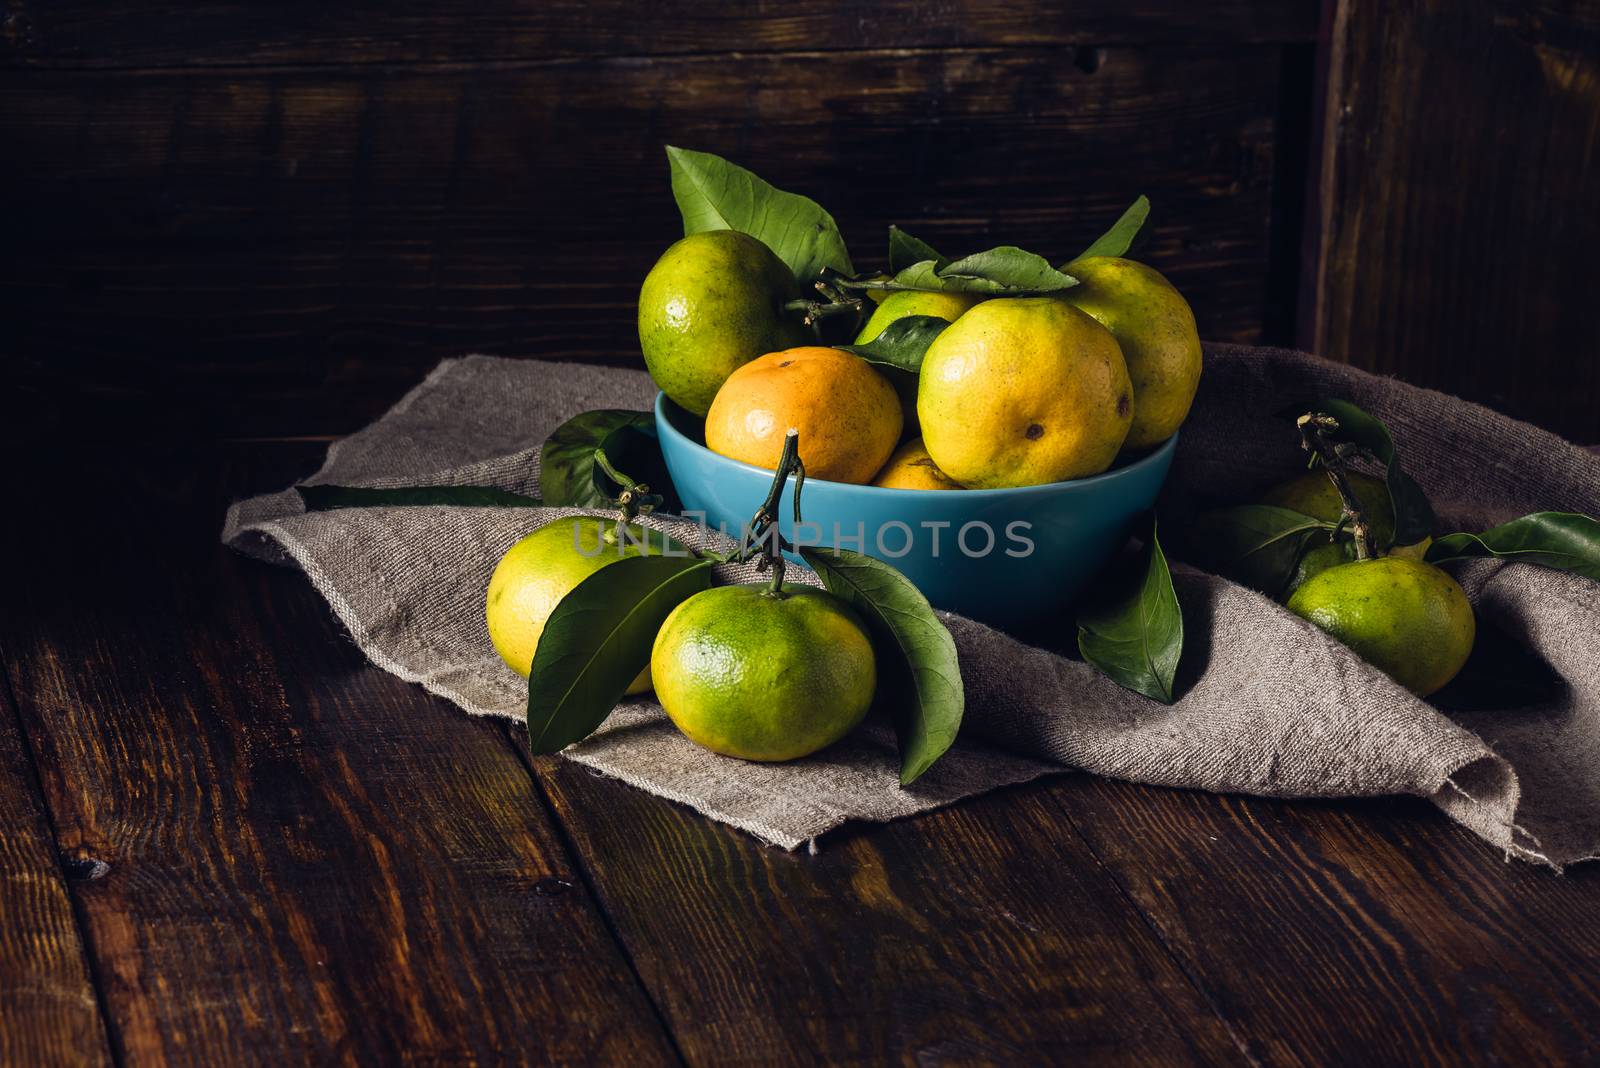 Yellow-green Tangerines with Leaves in Blue Bowl